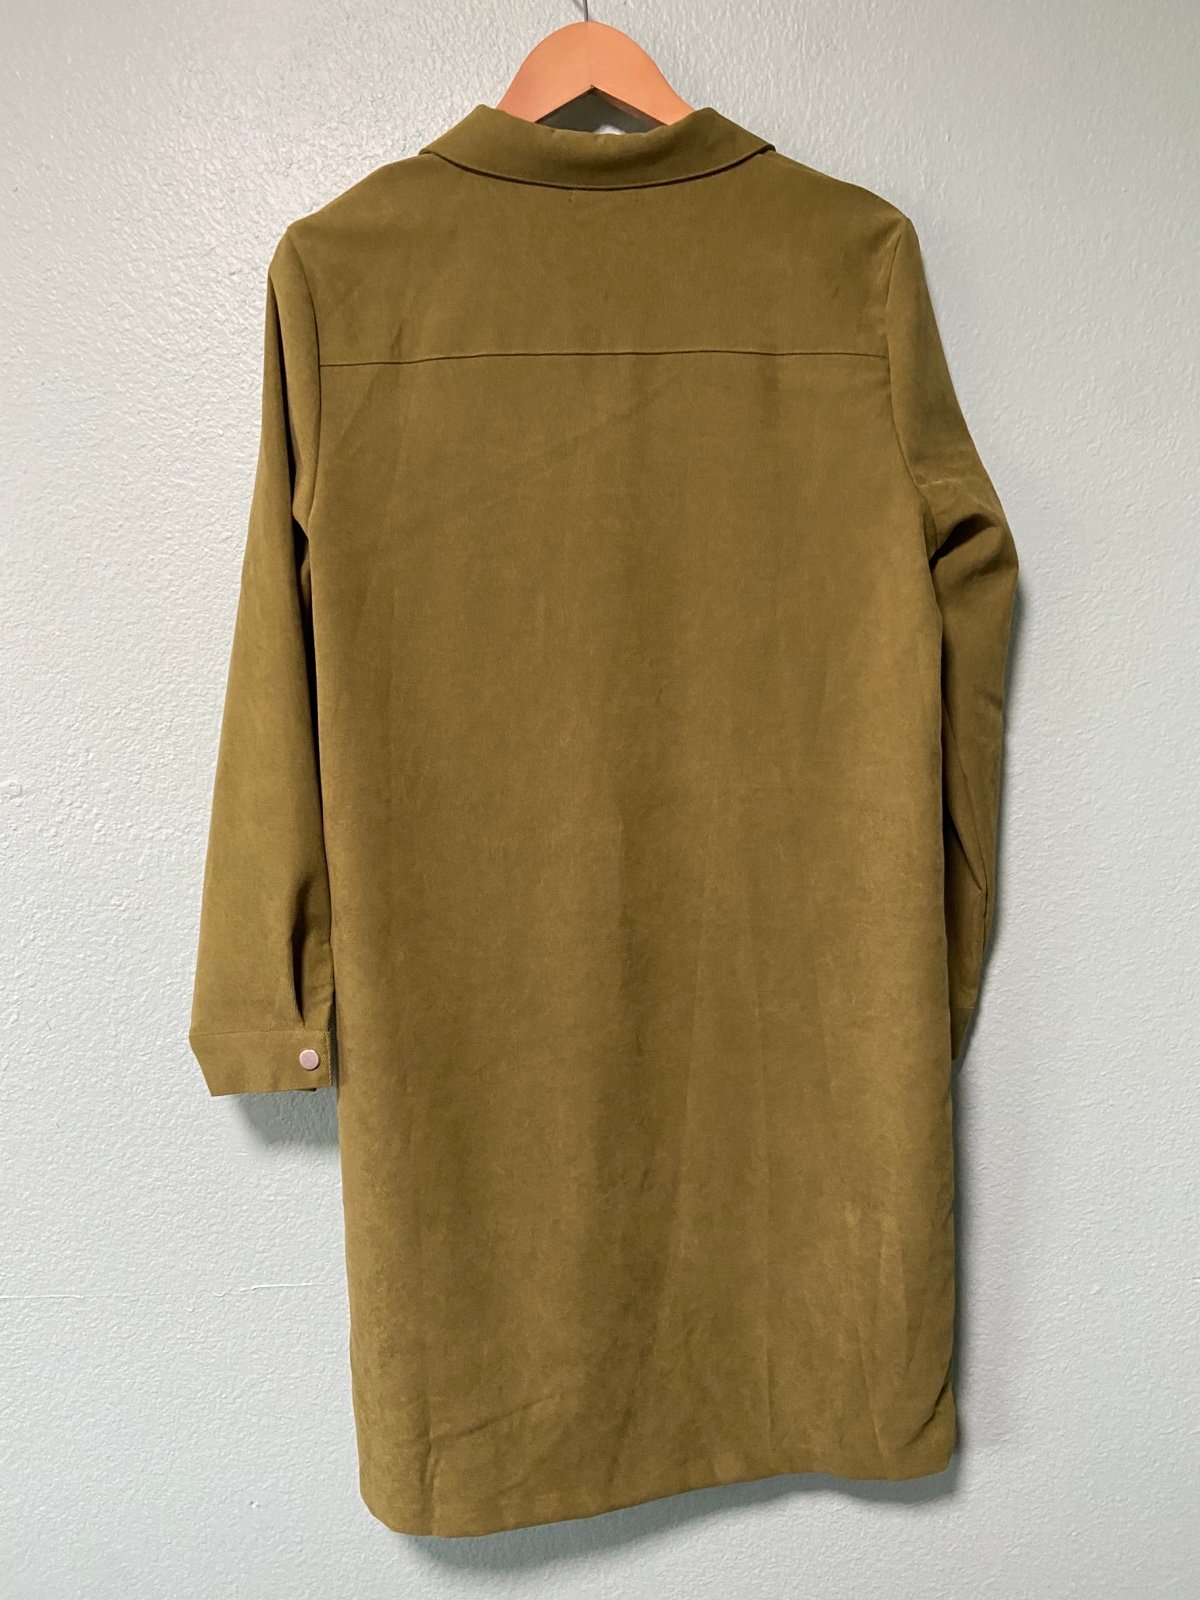 Amazing Nasty Gal Women´s Olive Green Snap Button Down Dress Size 4 o6kzZM5eA Hot Sale